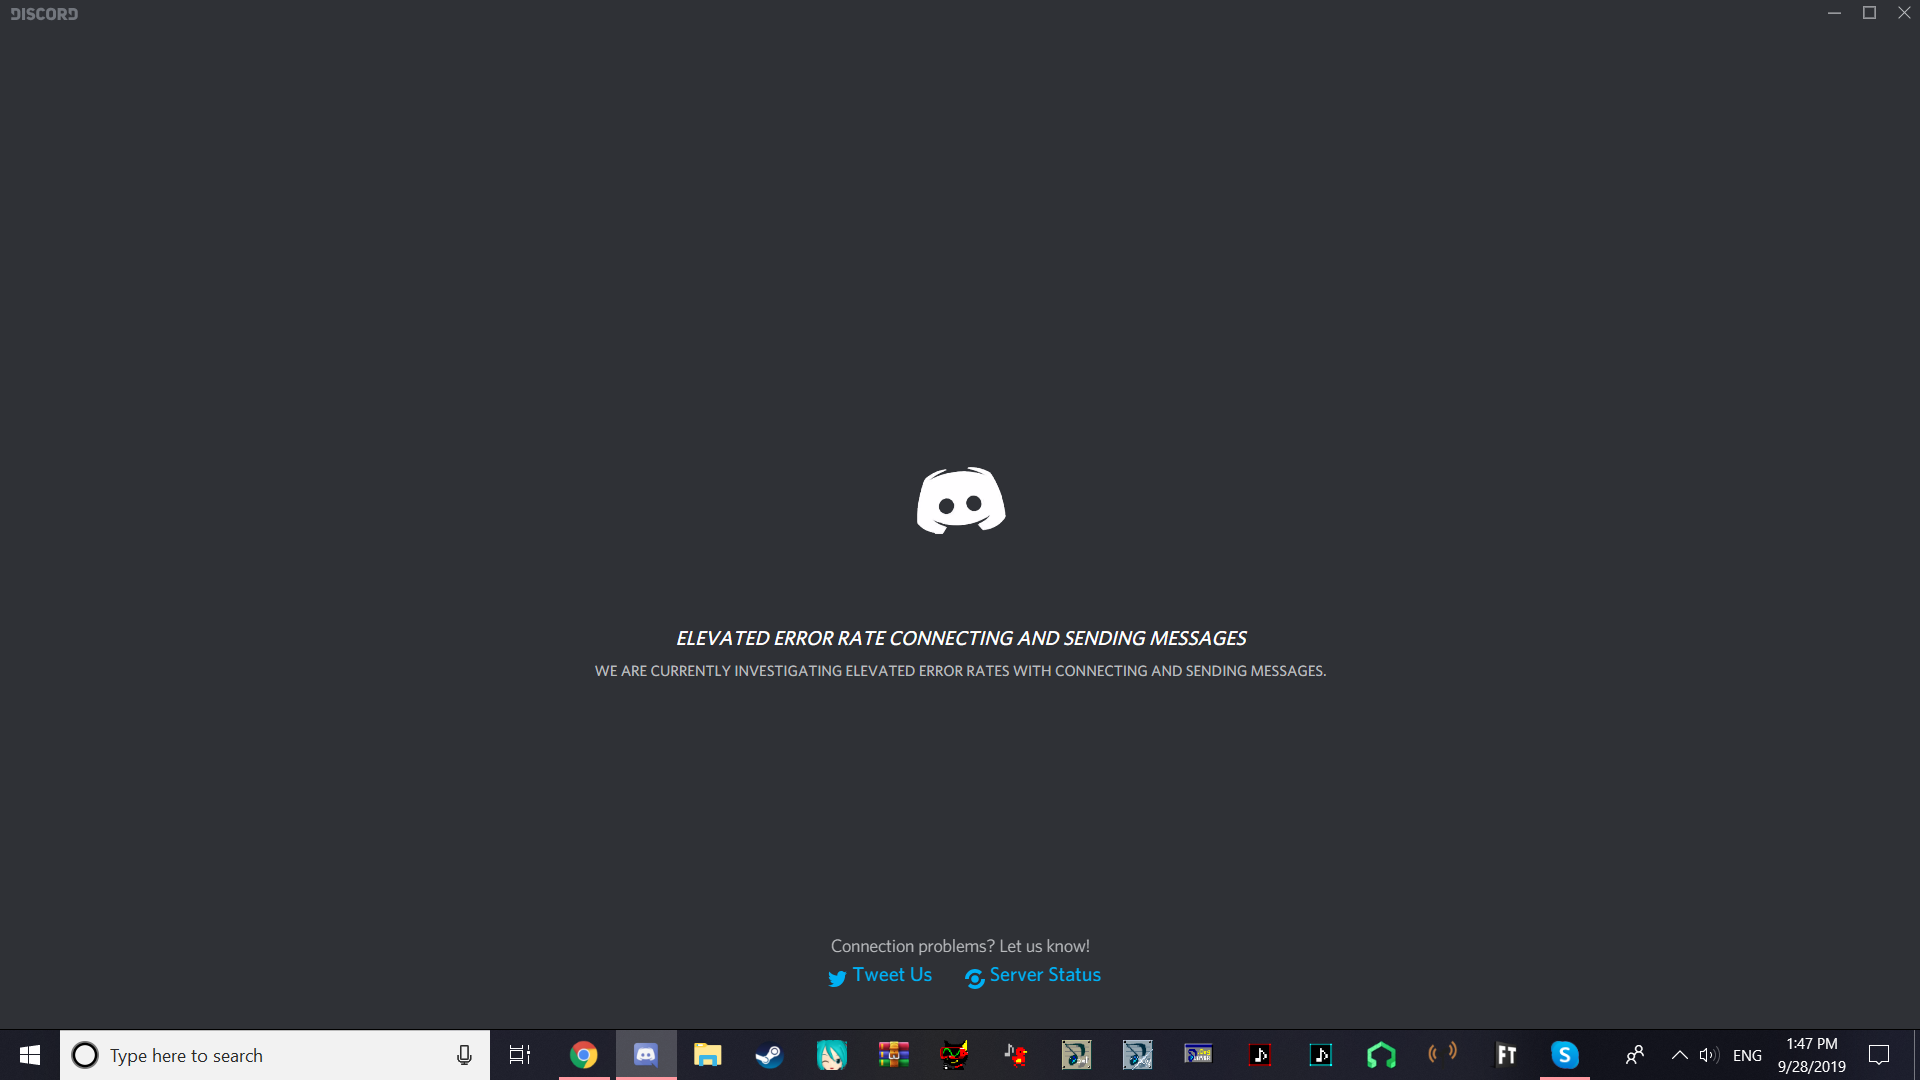 Discord Outage